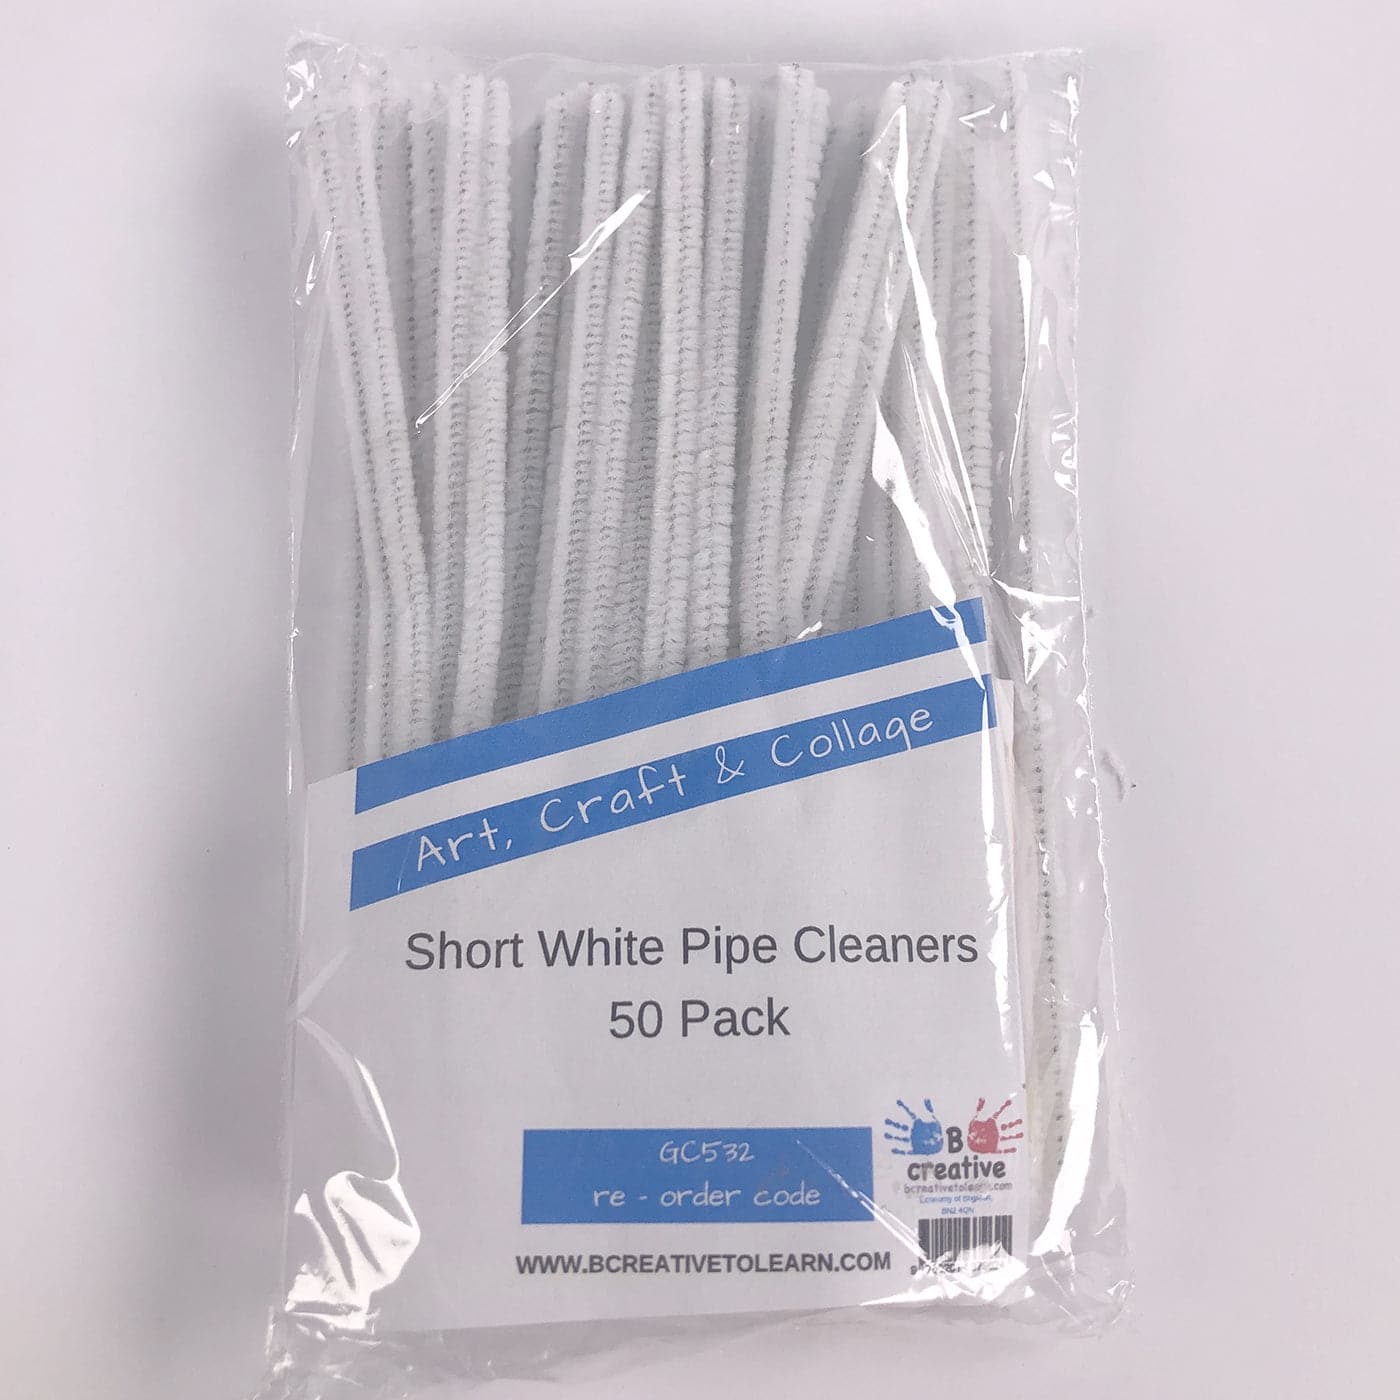 Short White Pipe Cleaners